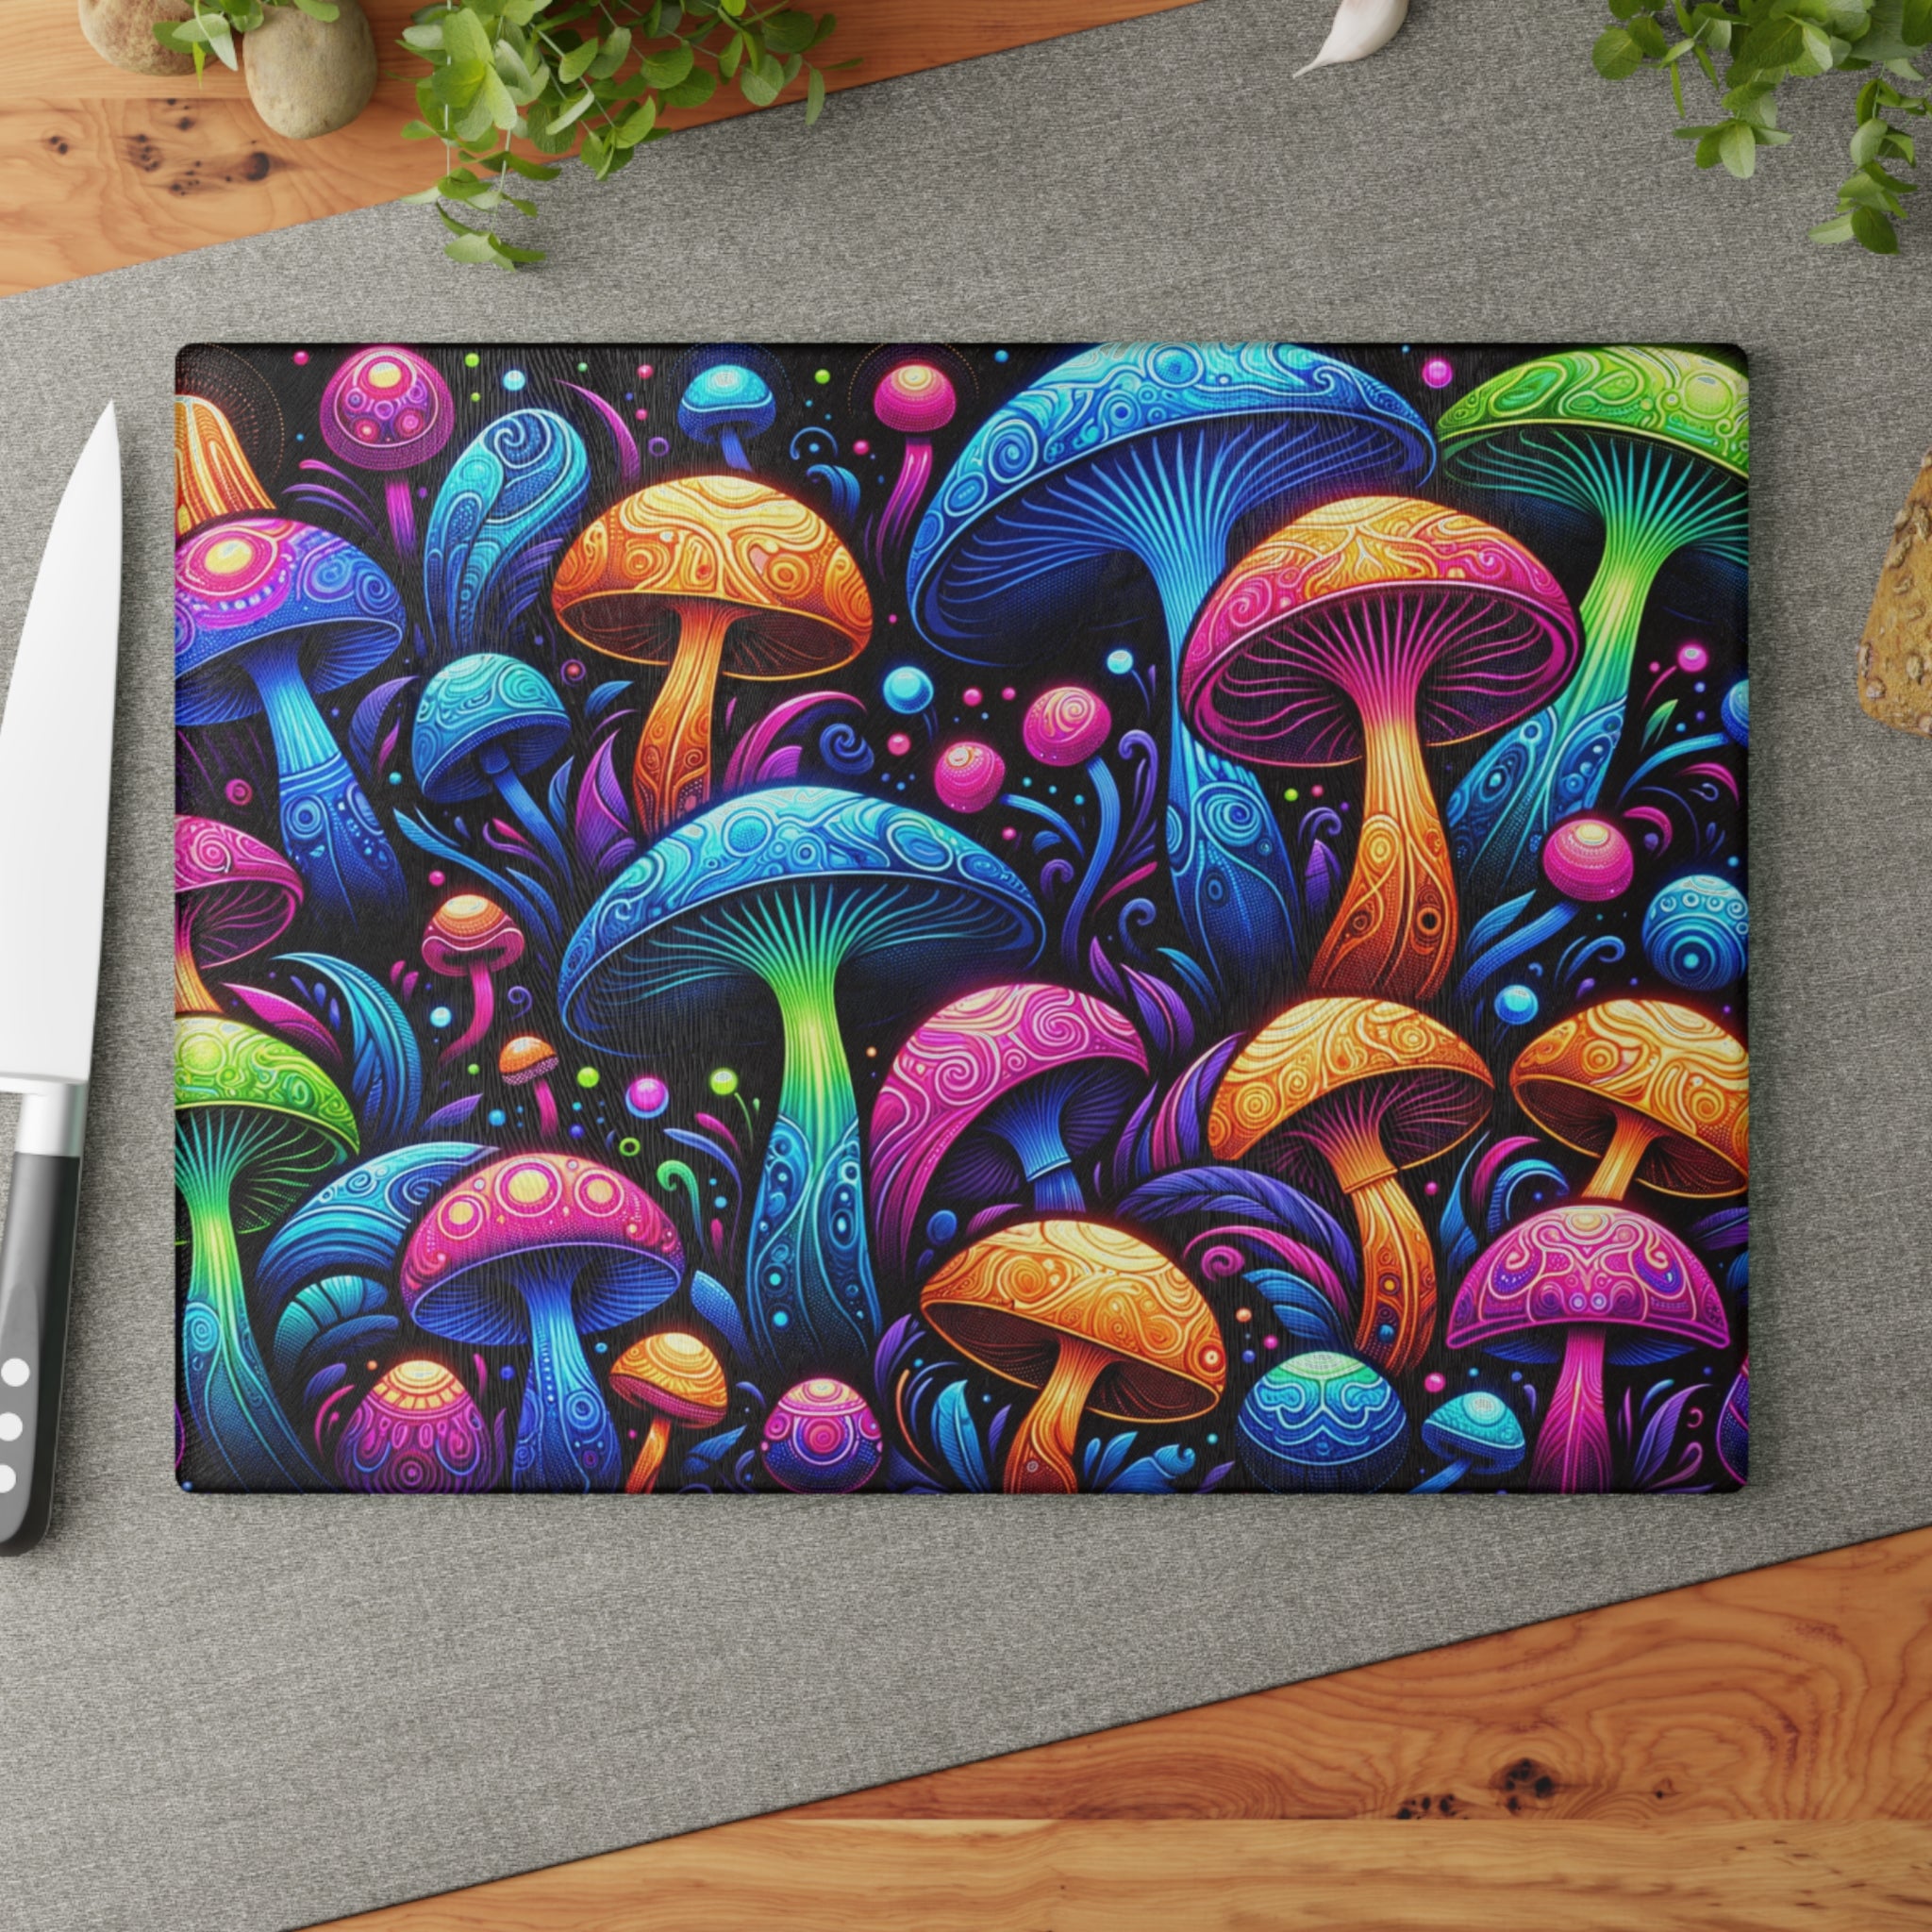 Colorful Mushroom Whimsical Glass Cutting Board Kitchen Boho Eclectic Home Decor Gift for Her